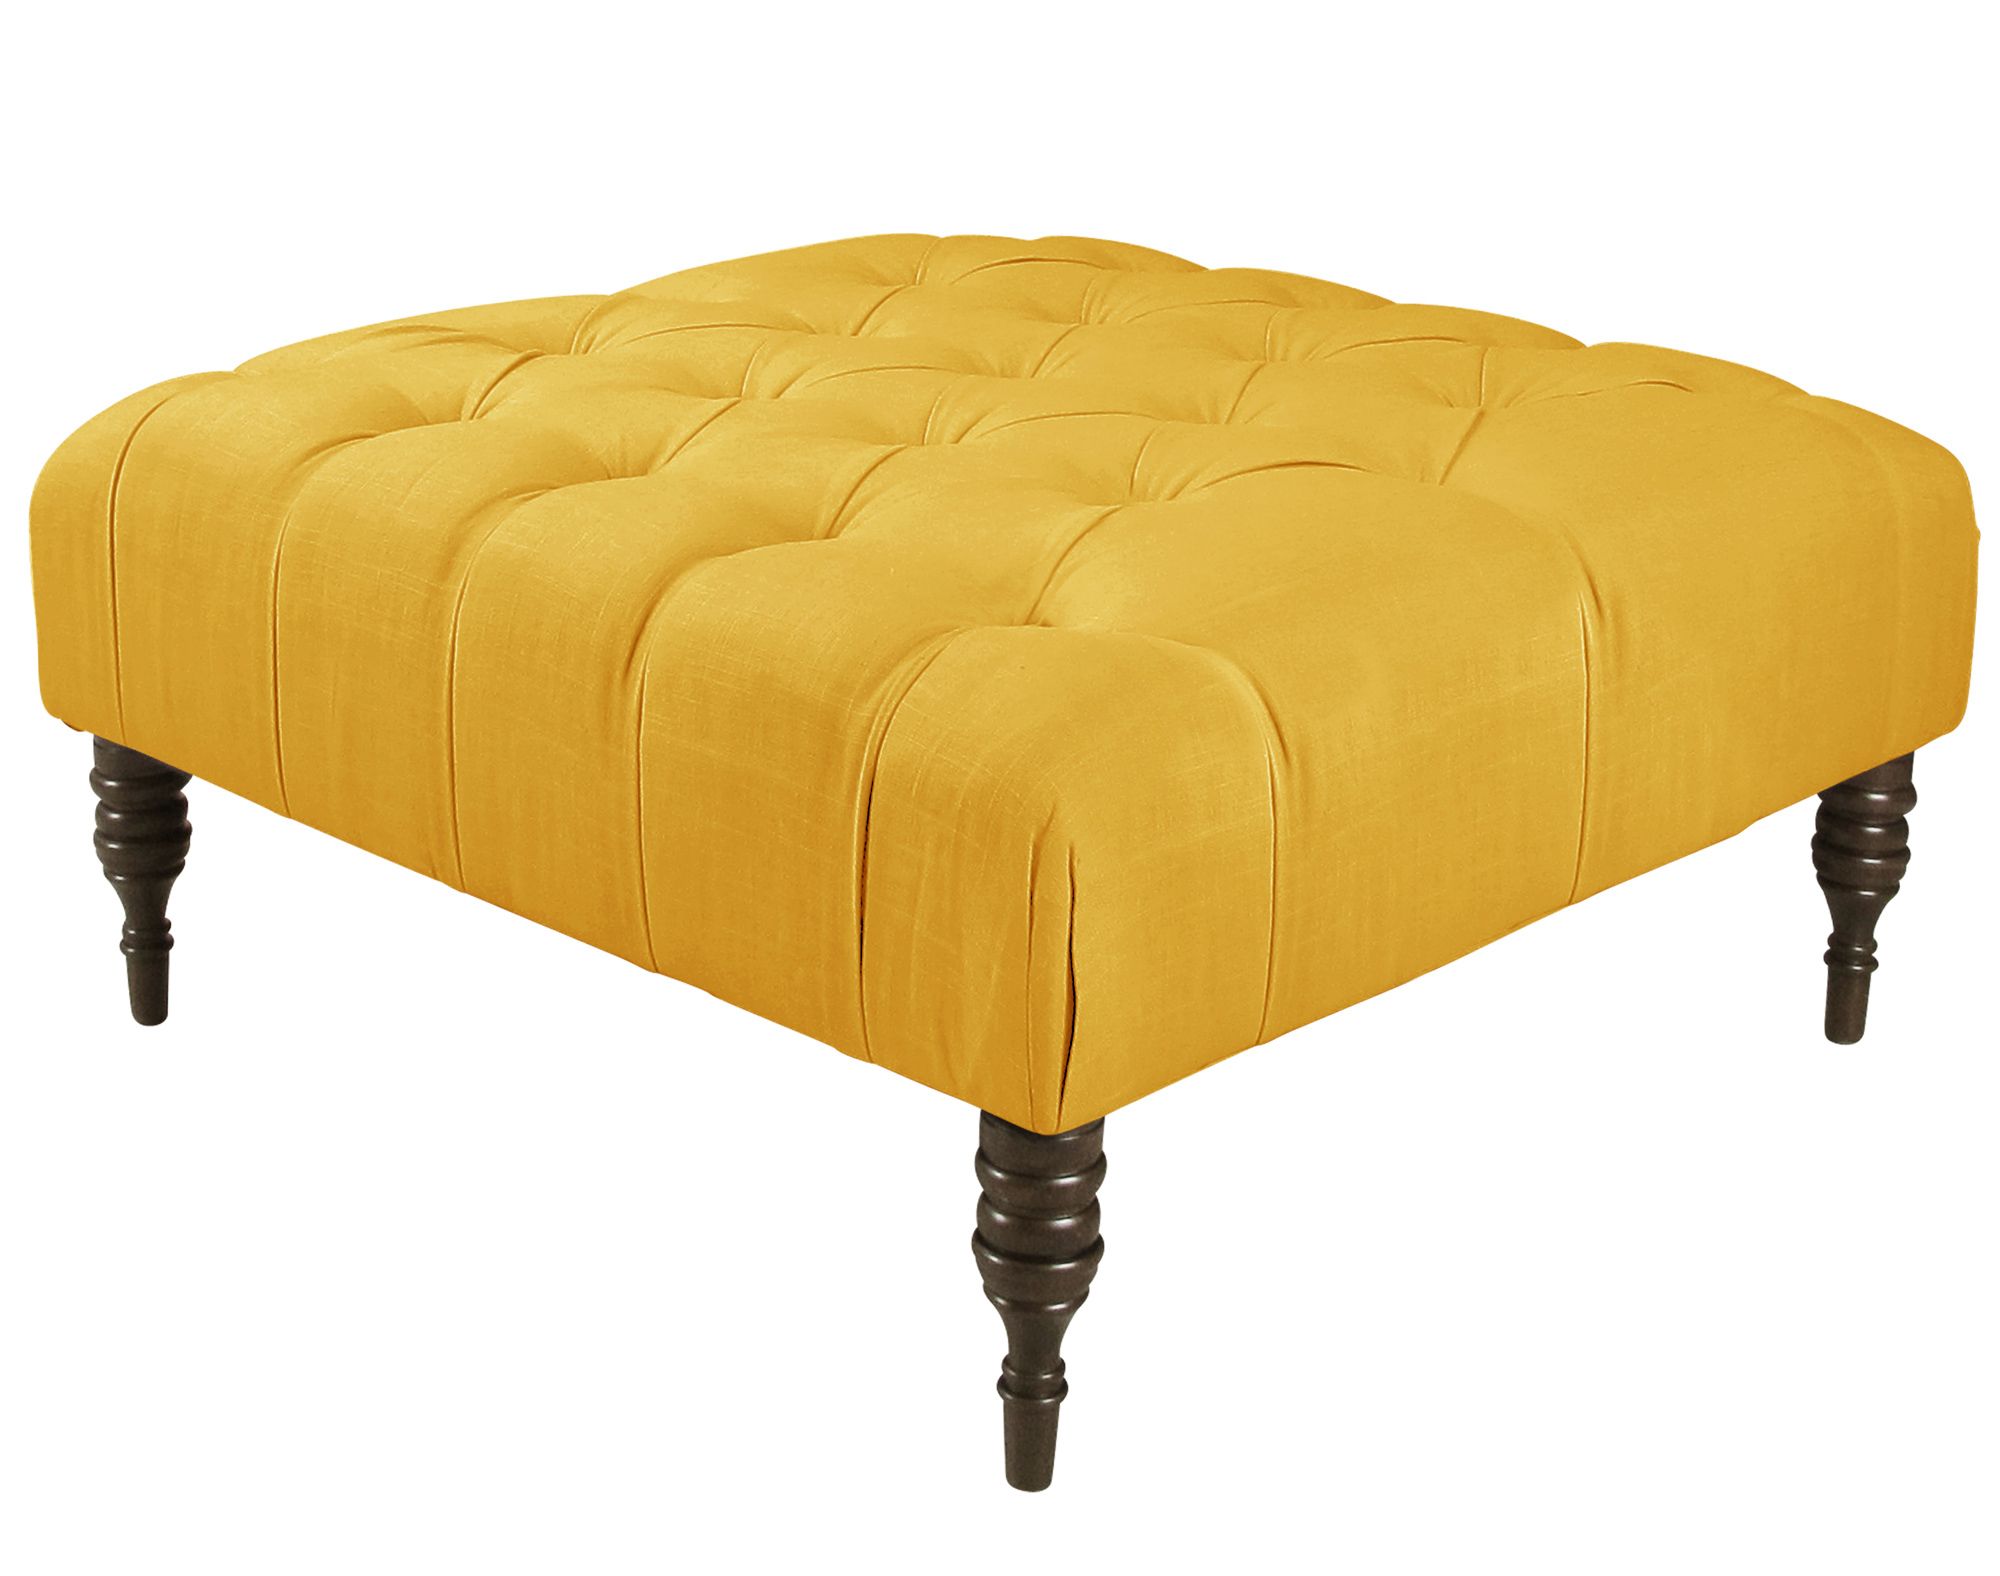 Skyline Furniture Regarding Most Recently Released Linen Fabric Tufted Surfboard Ottomans (View 3 of 10)